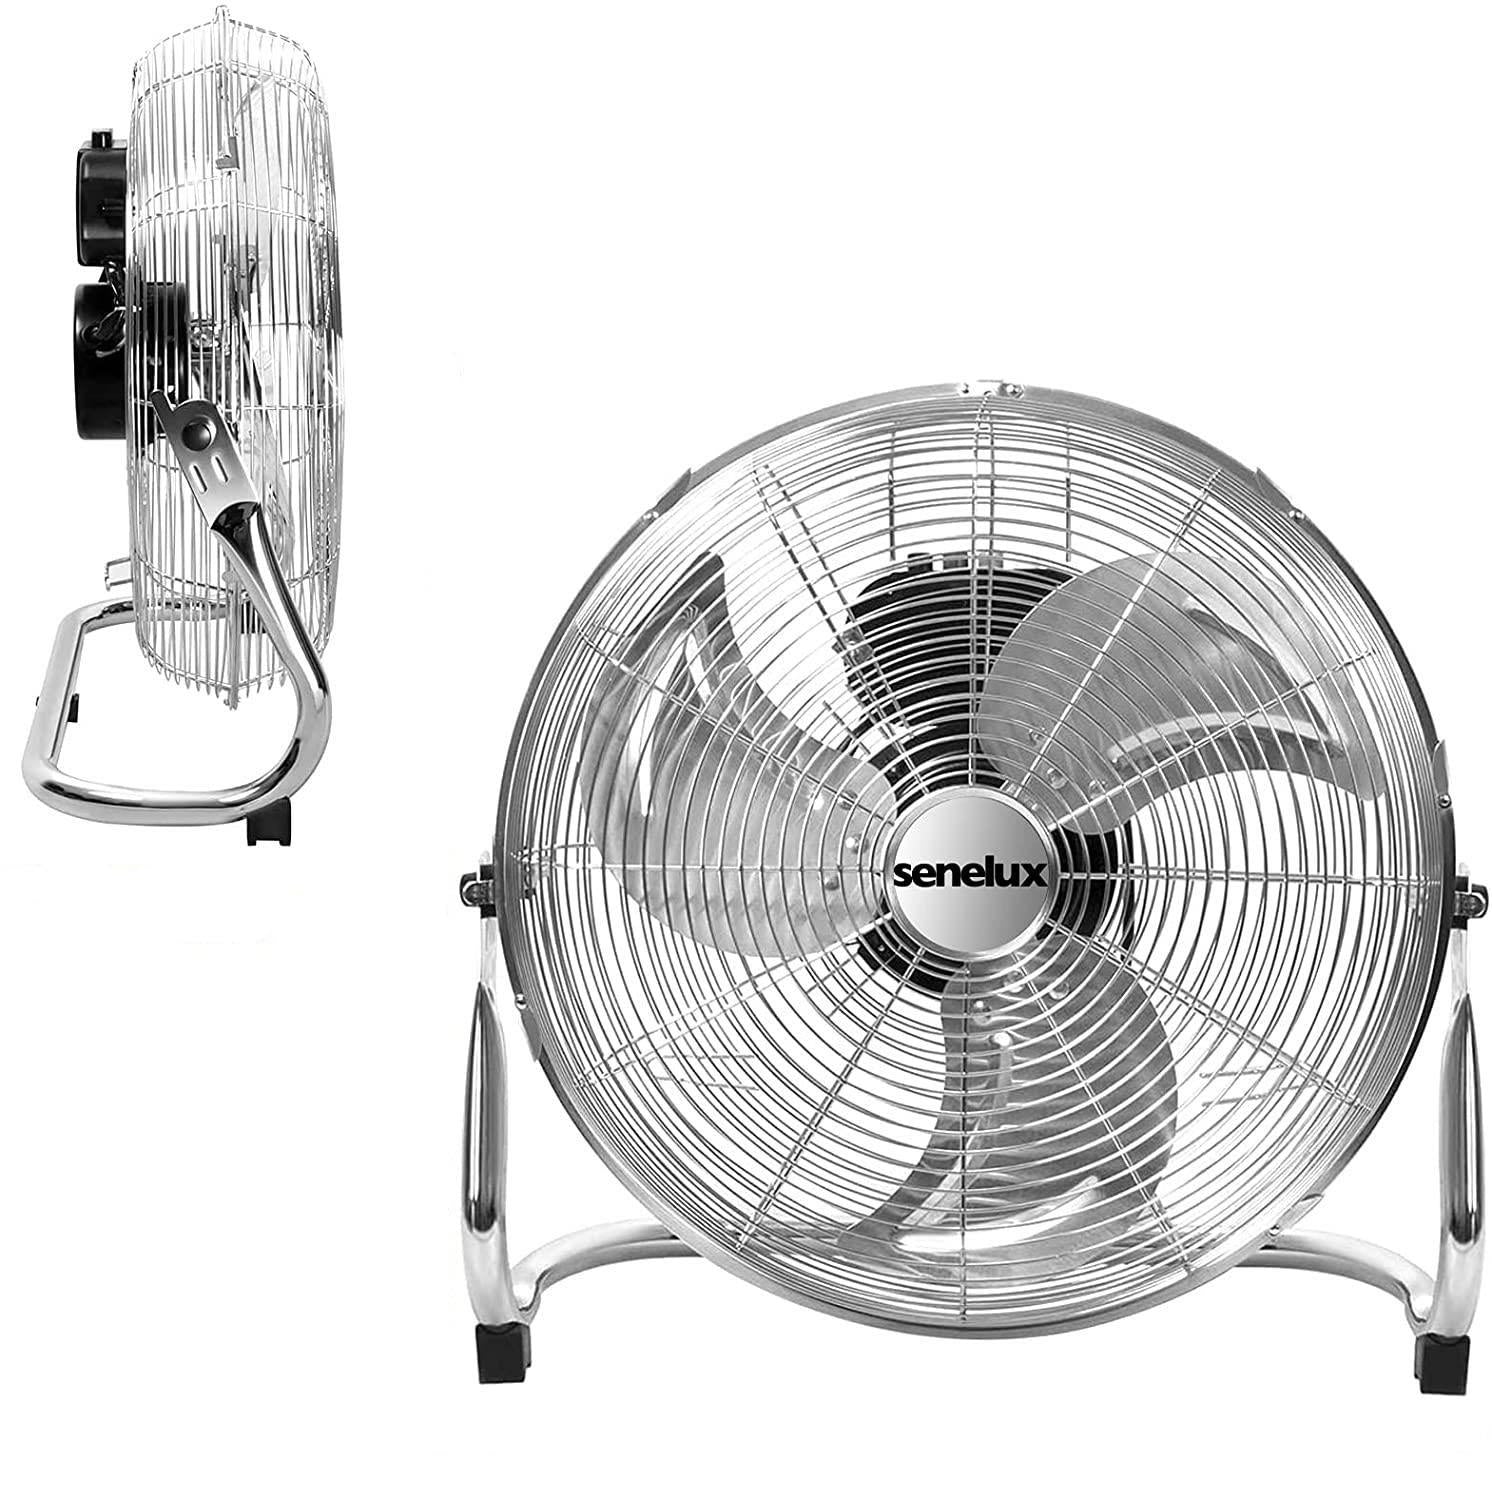 A two in one picture of a Senelux floor fan showing the polished steel fan from the side and from the front